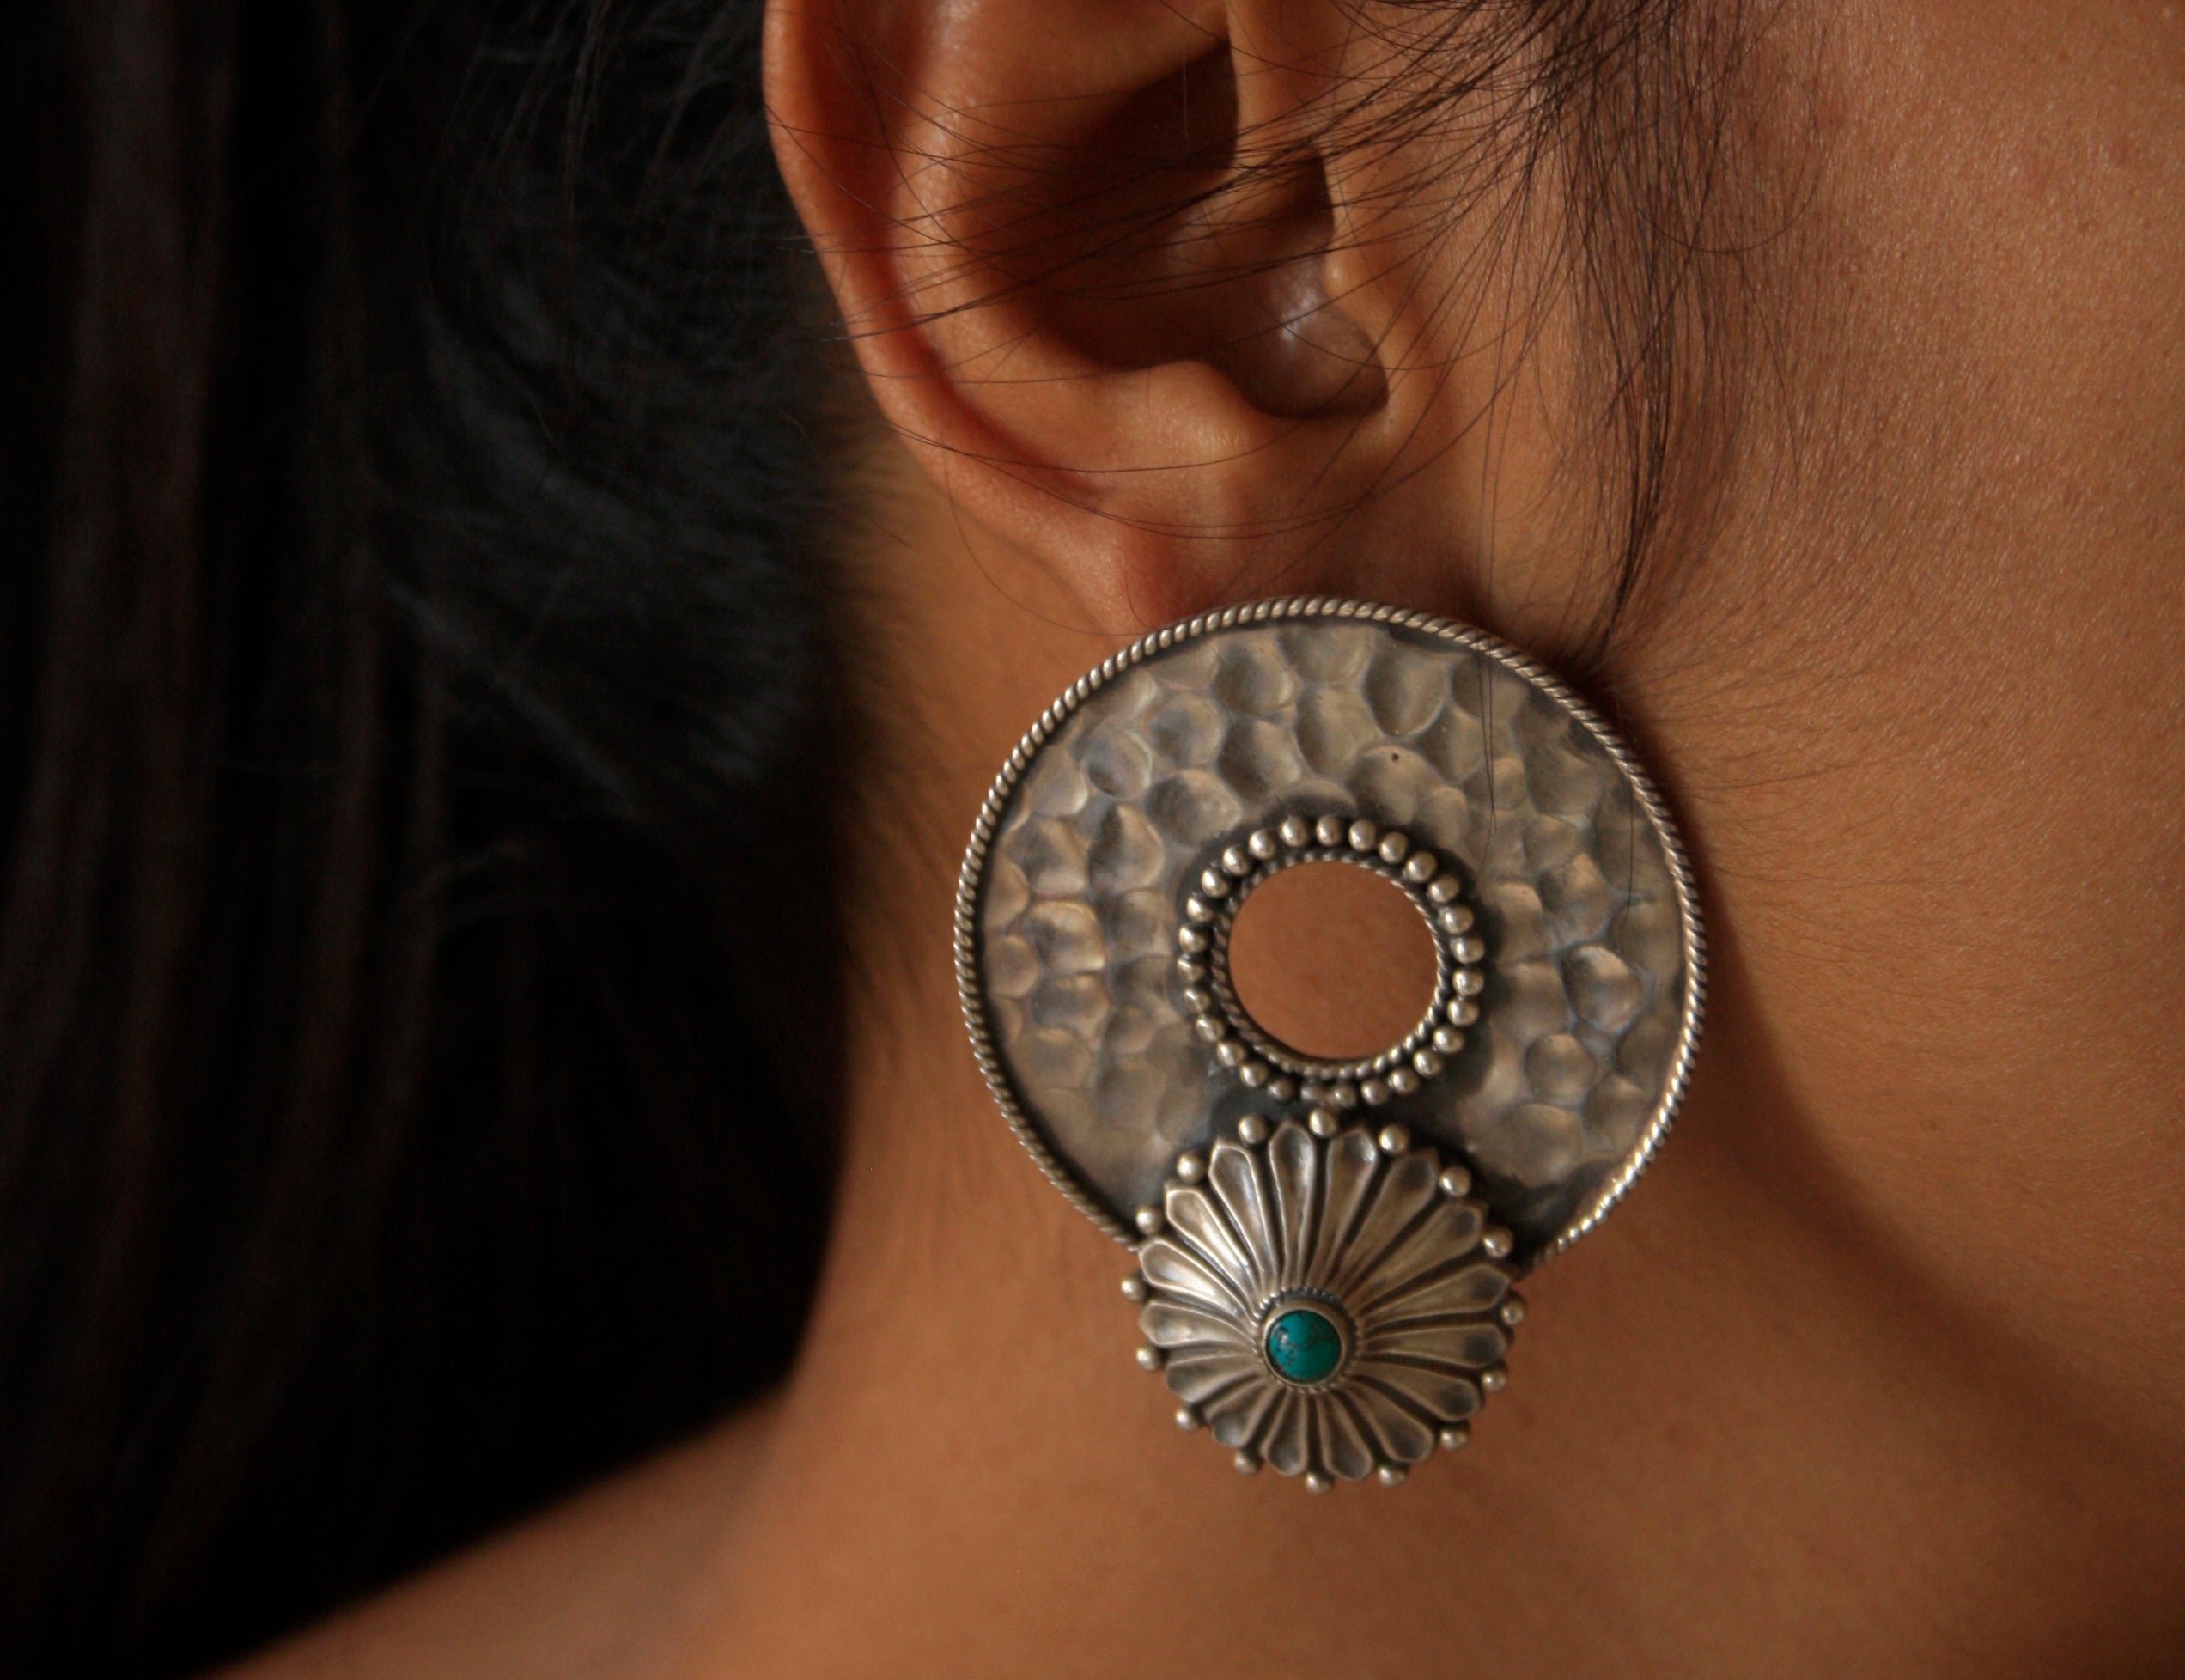 Buy Quirky Silver Earrings Online in India - Bevel Earrings - Quirksmith